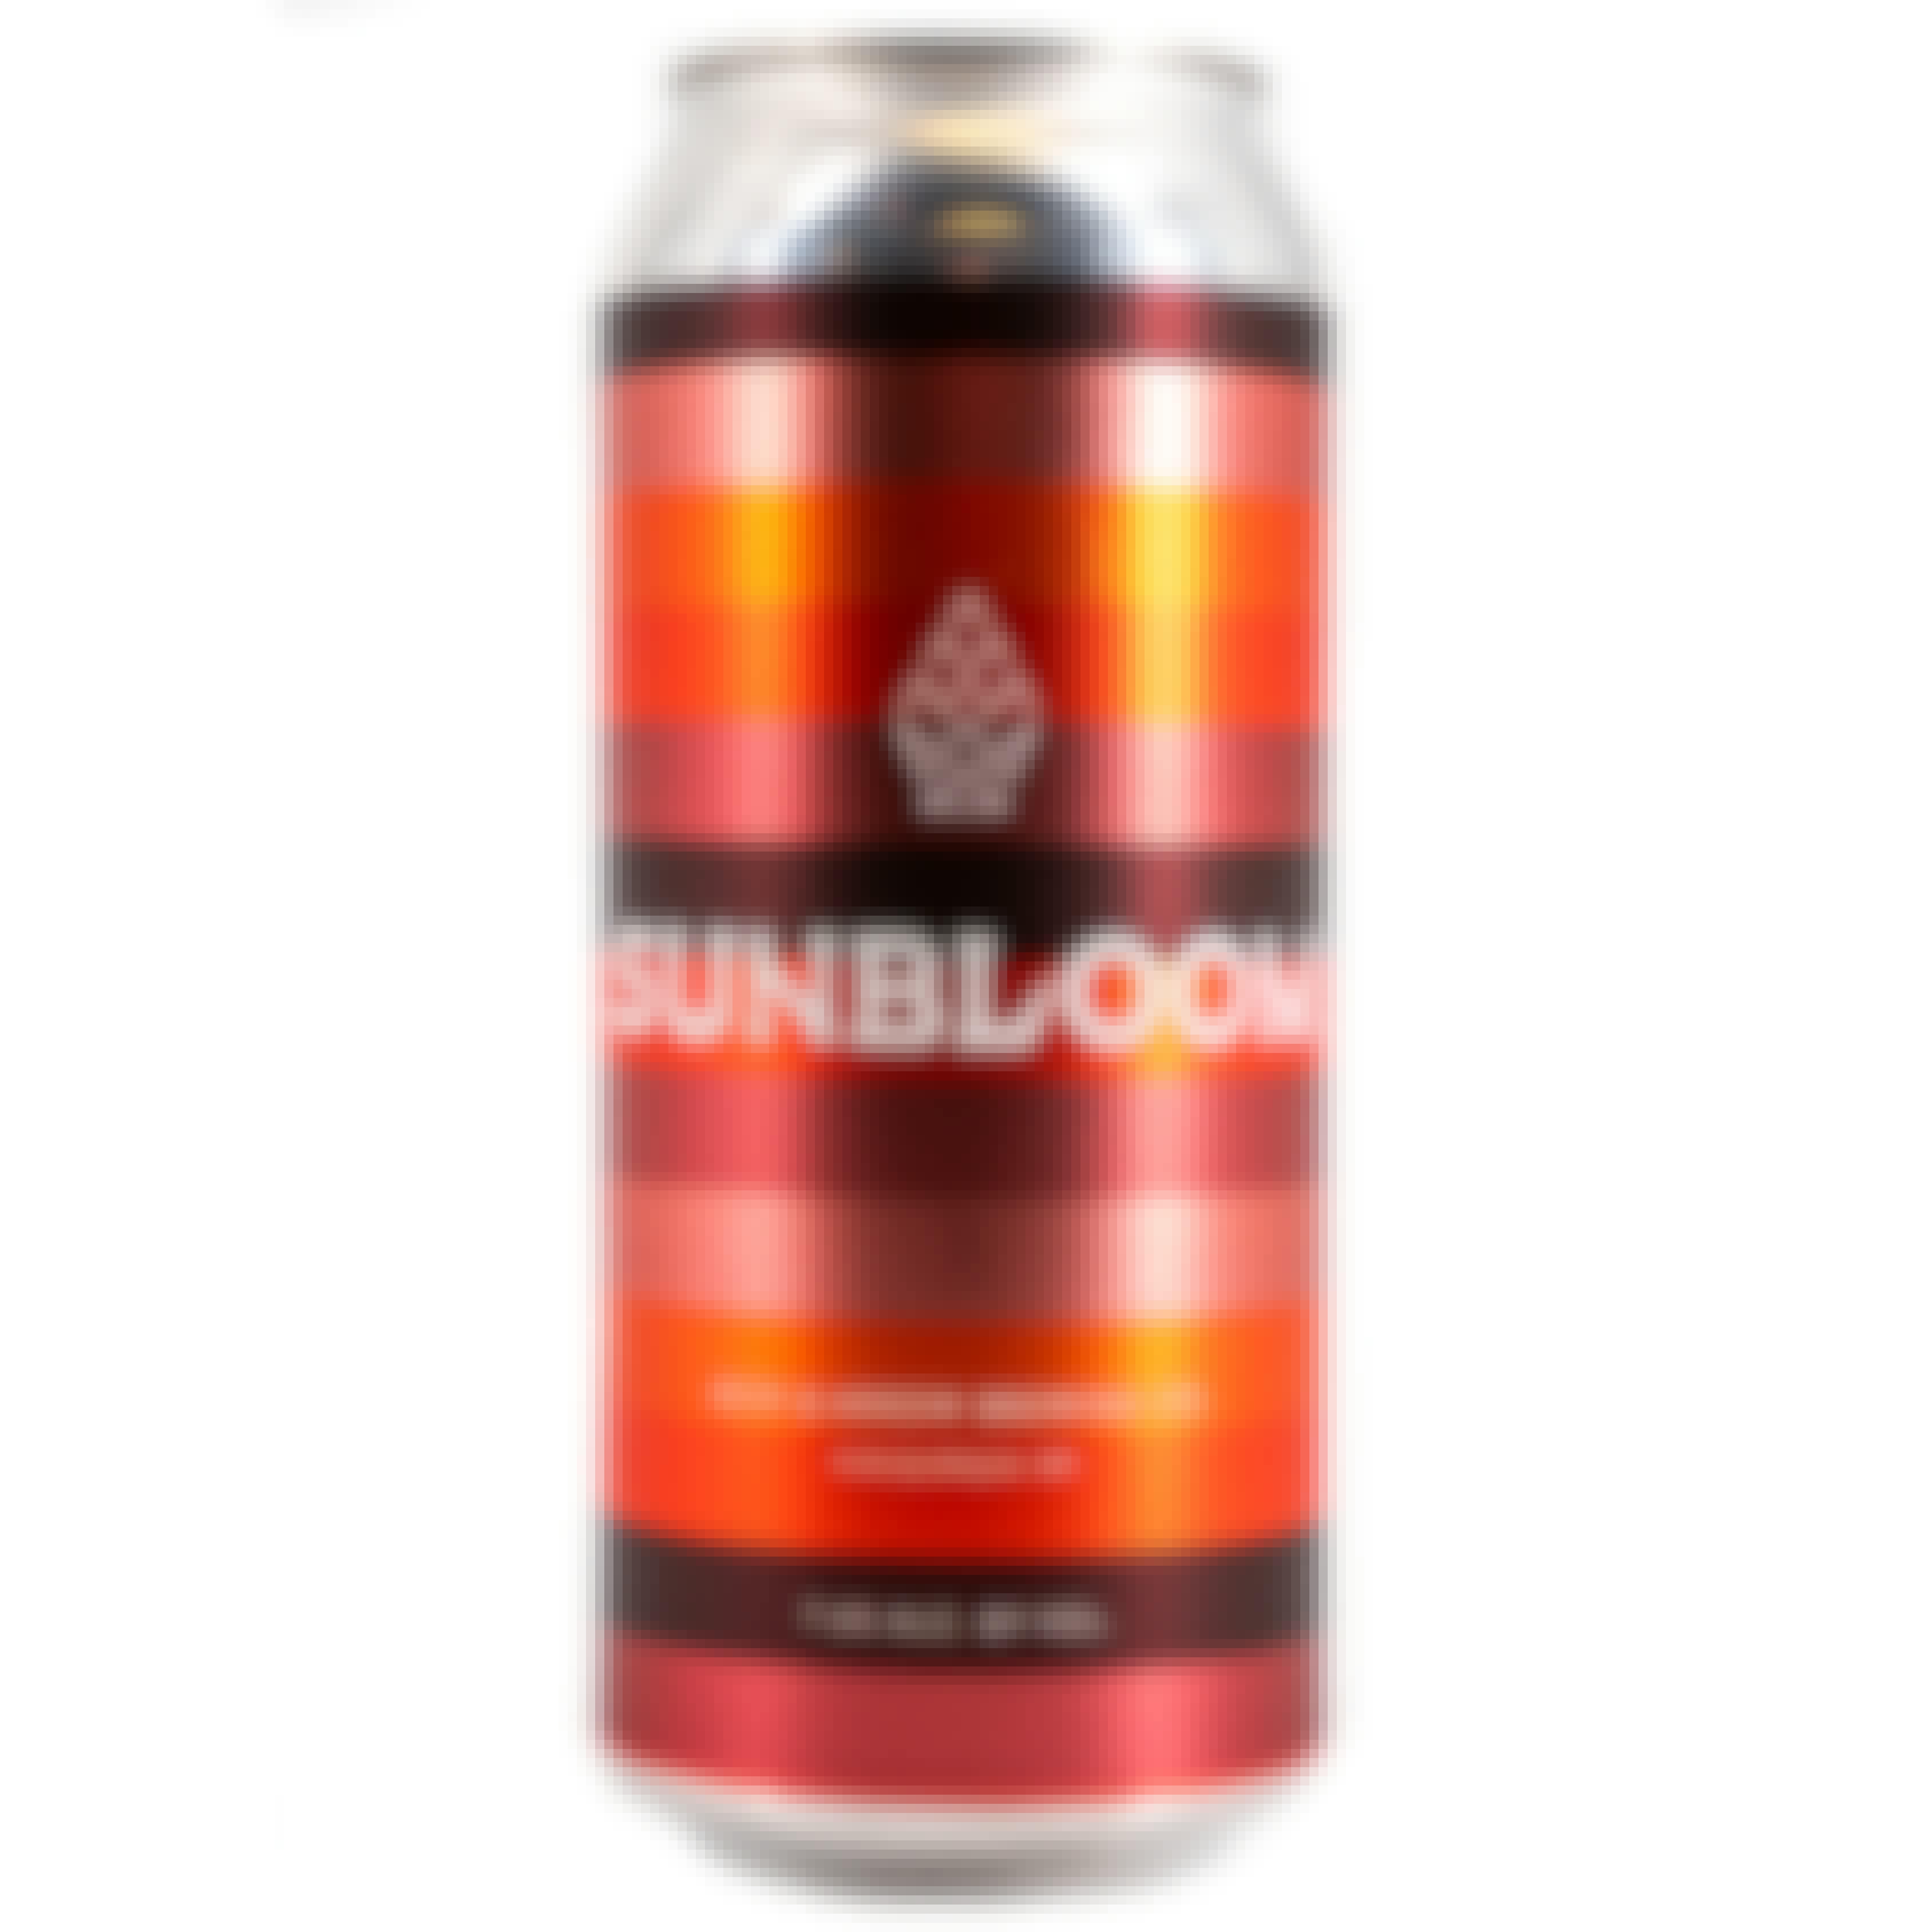 Bow & Arrow Brewing Co Sunbloom 4 pack 16 oz. Can